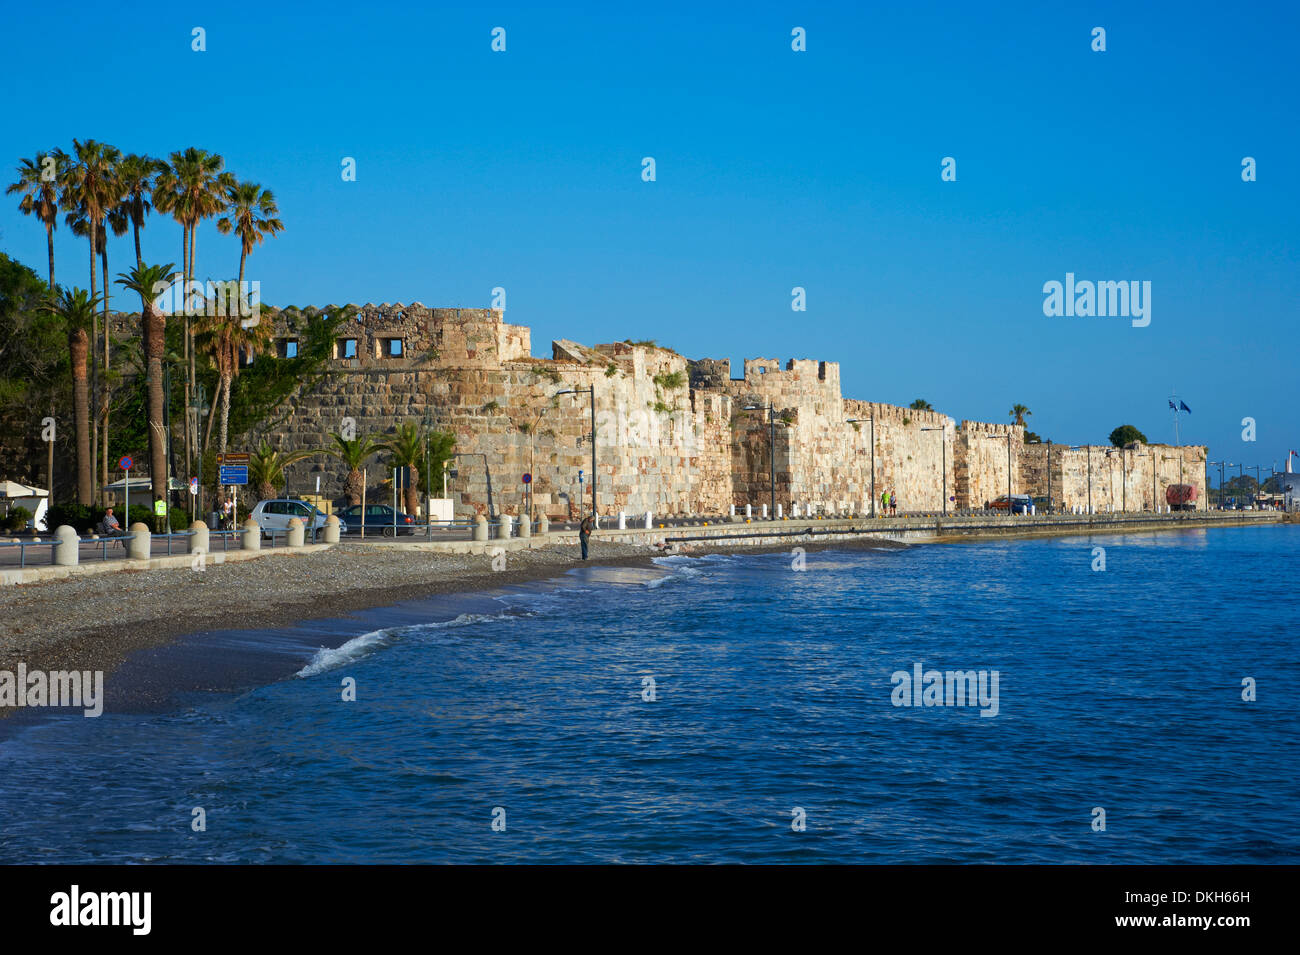 Old town Castle, Kos, Dodecanese, Greek Islands, Greece, Europe Stock Photo